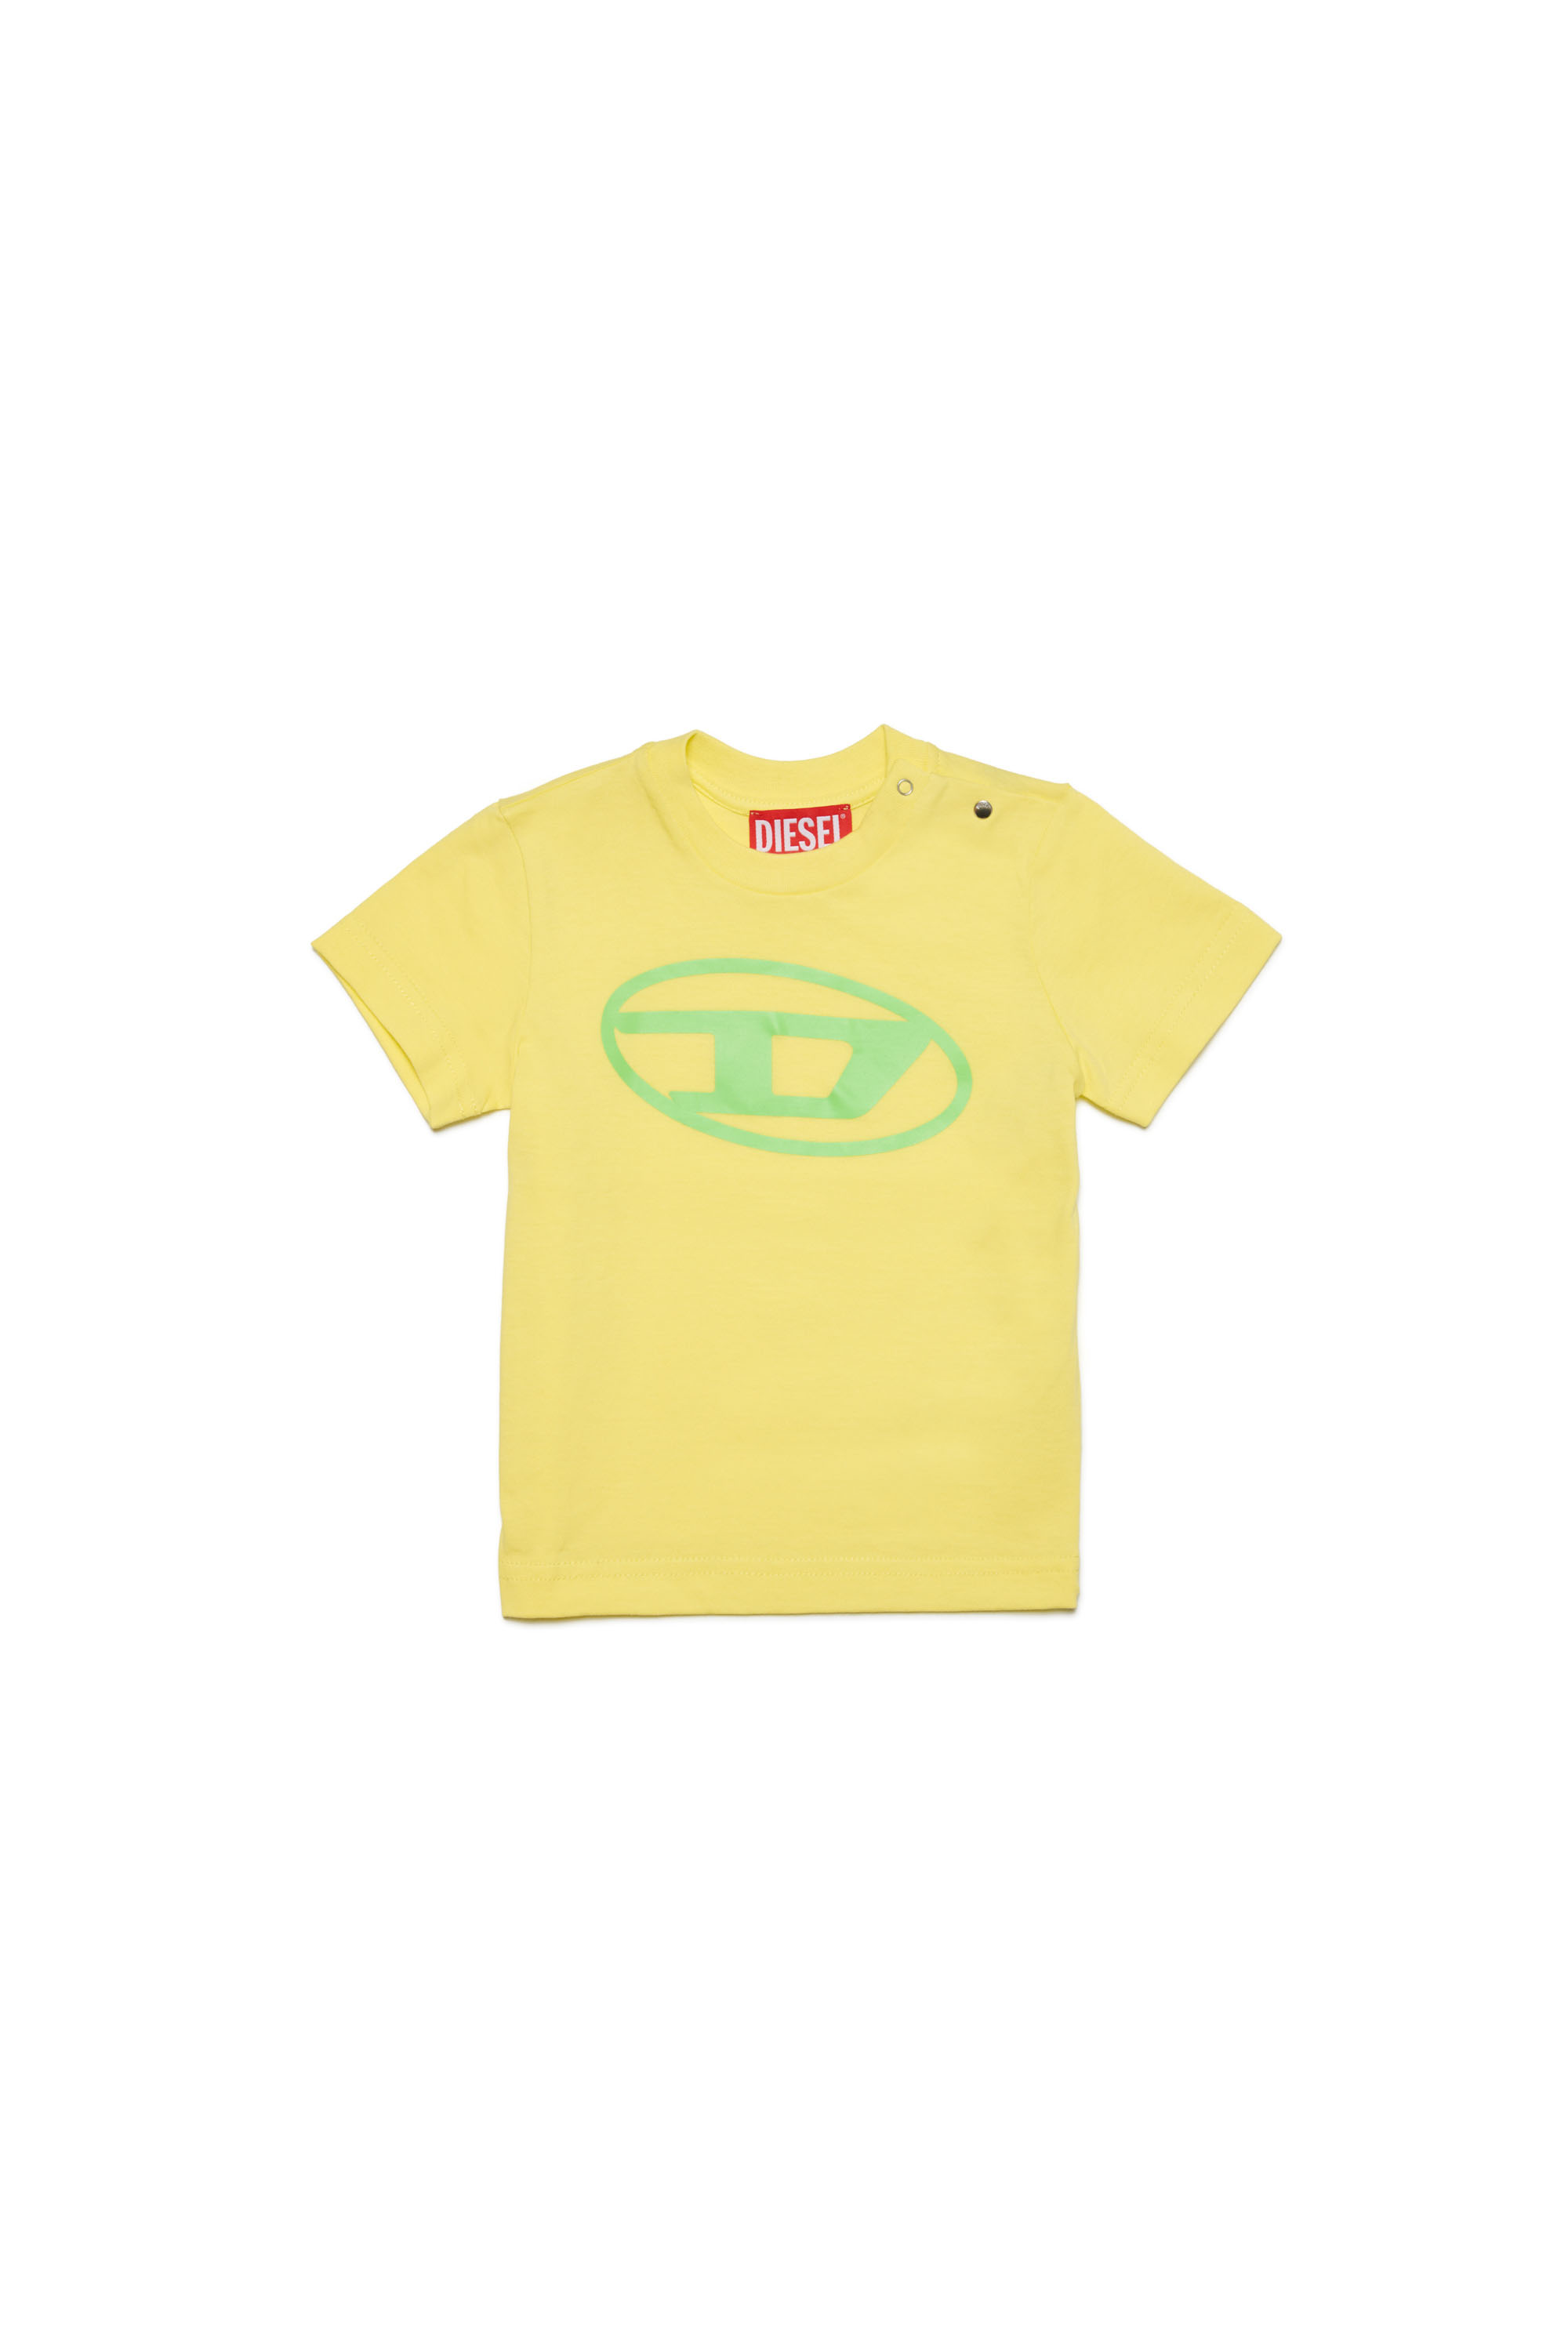 Diesel - TCERB, Yellow - Image 1